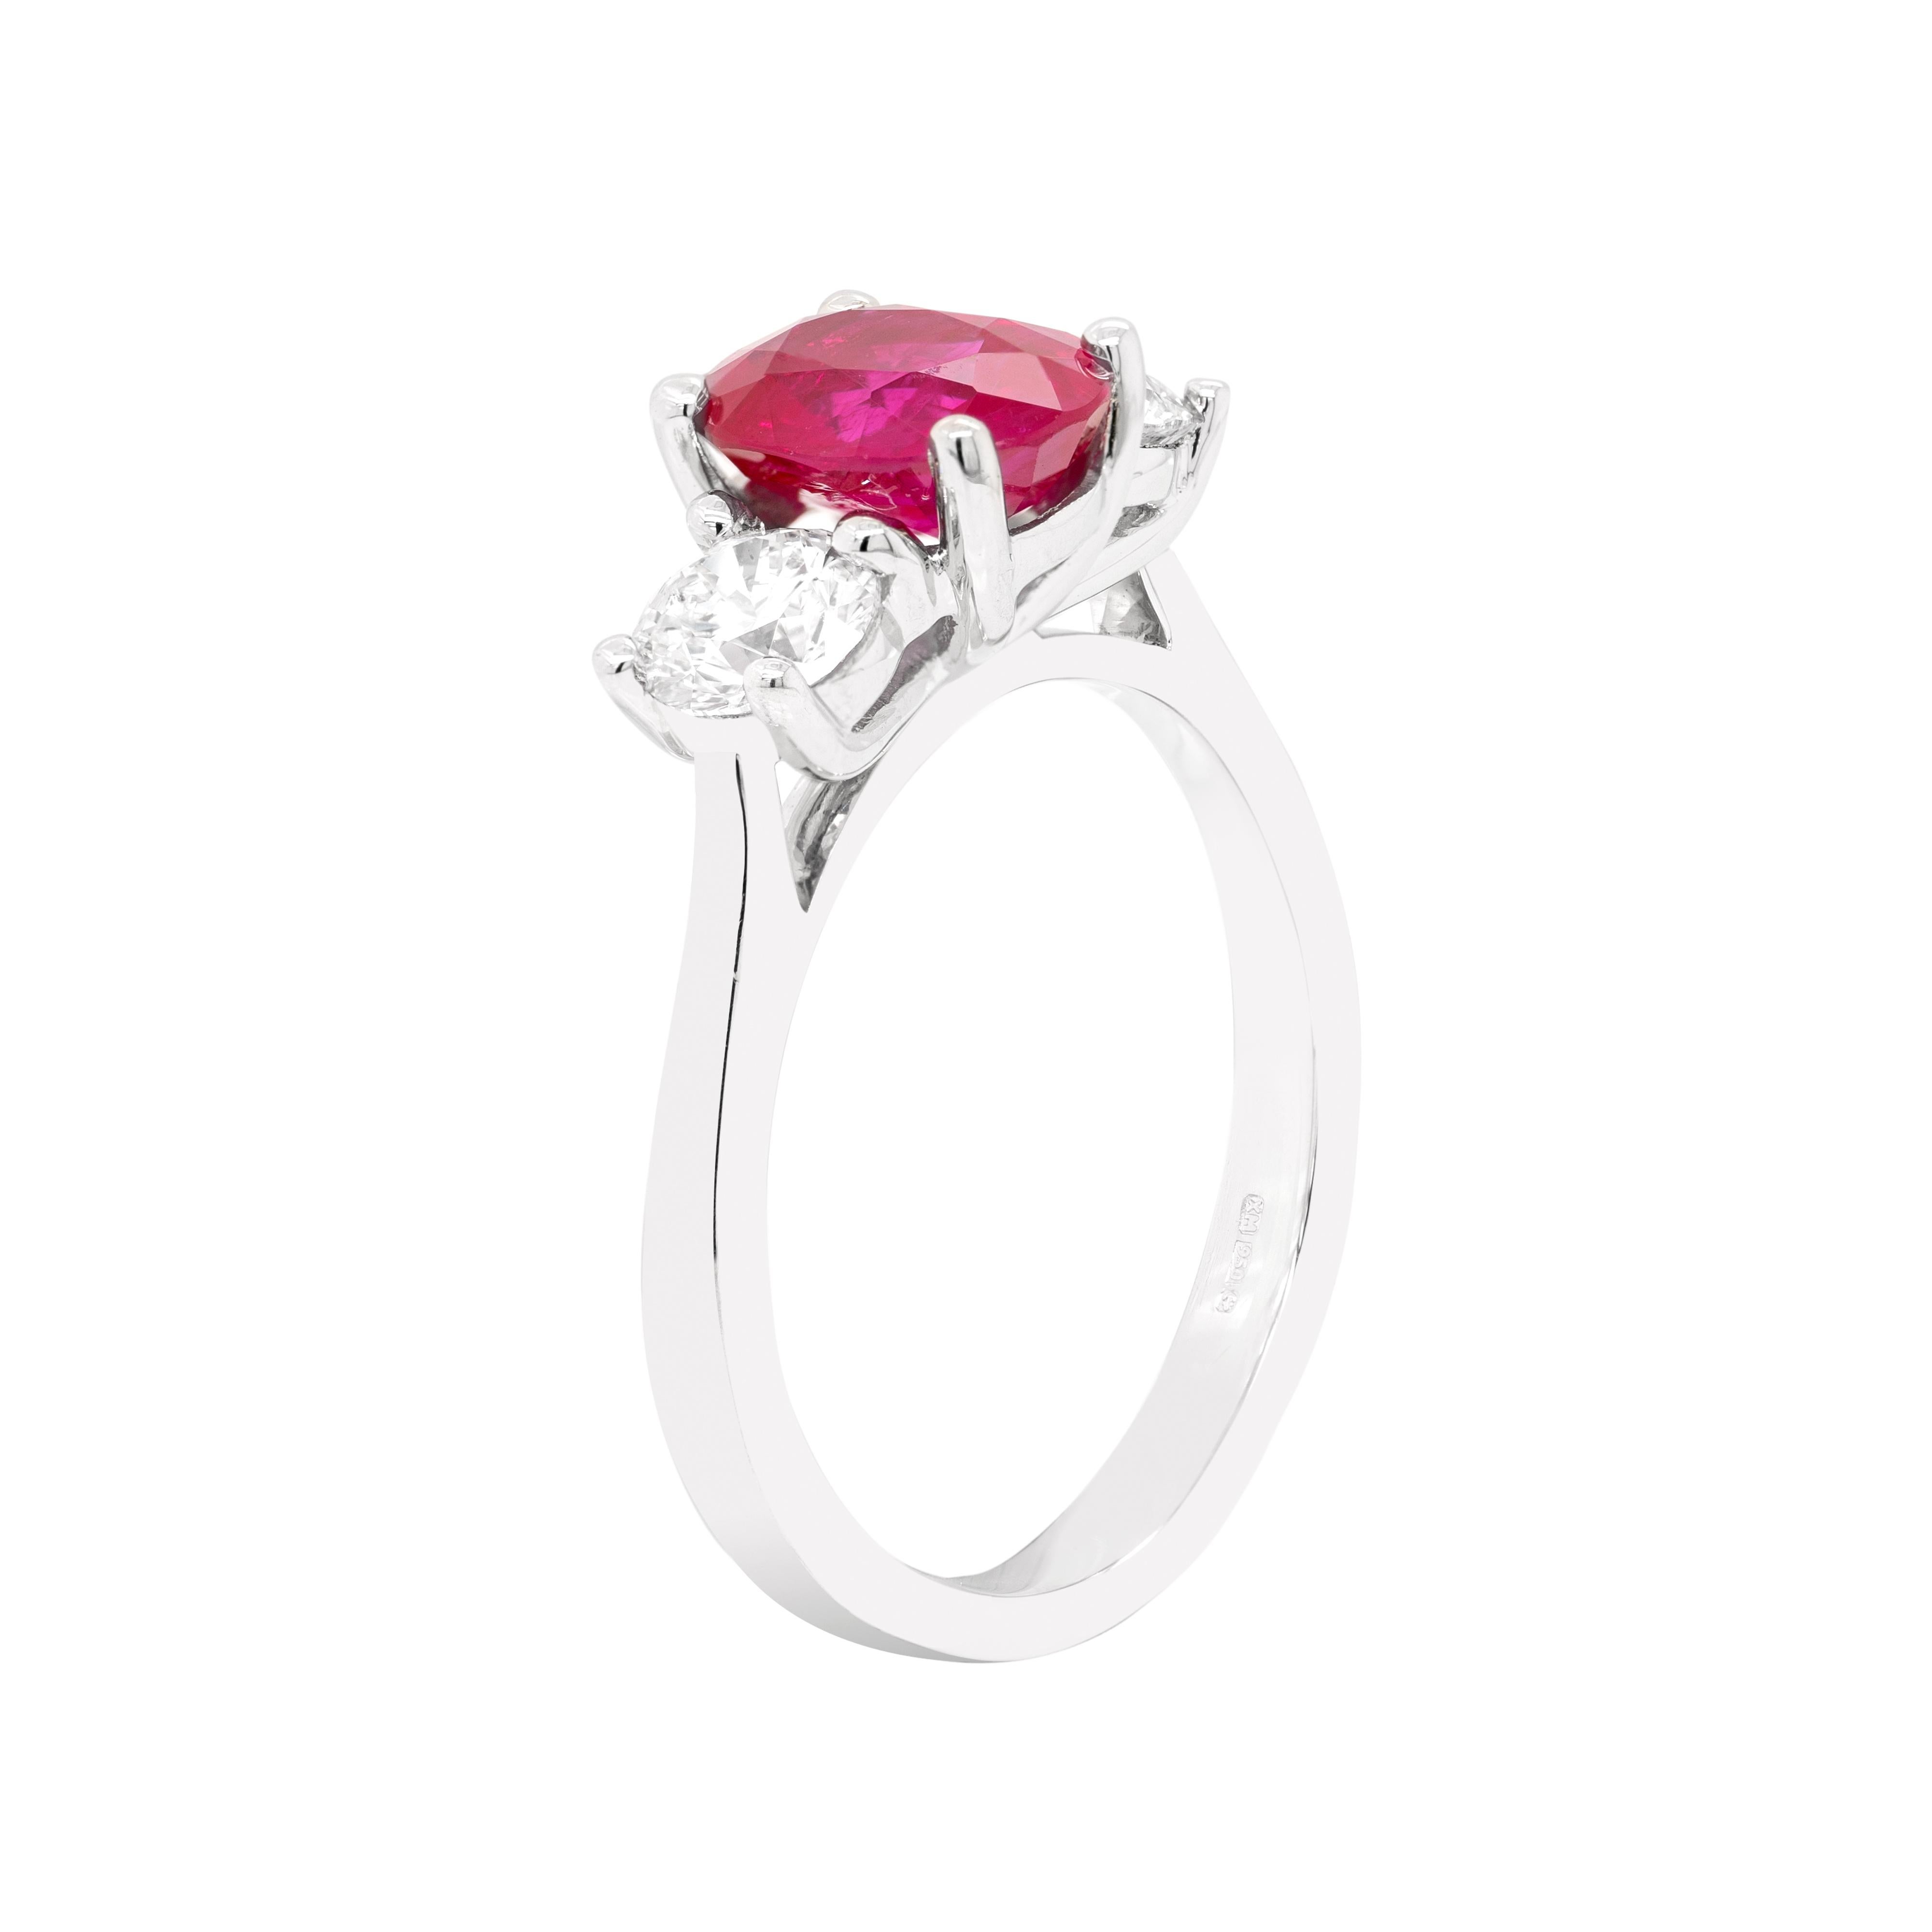 Exquisite platinum engagement ring featuring a 1.97ct vibrant oval shaped ruby in the centre, in a four claw, open back setting. The beautiful ruby is accompanied by two round brilliant cut diamonds, one on either side, with a total combined weight